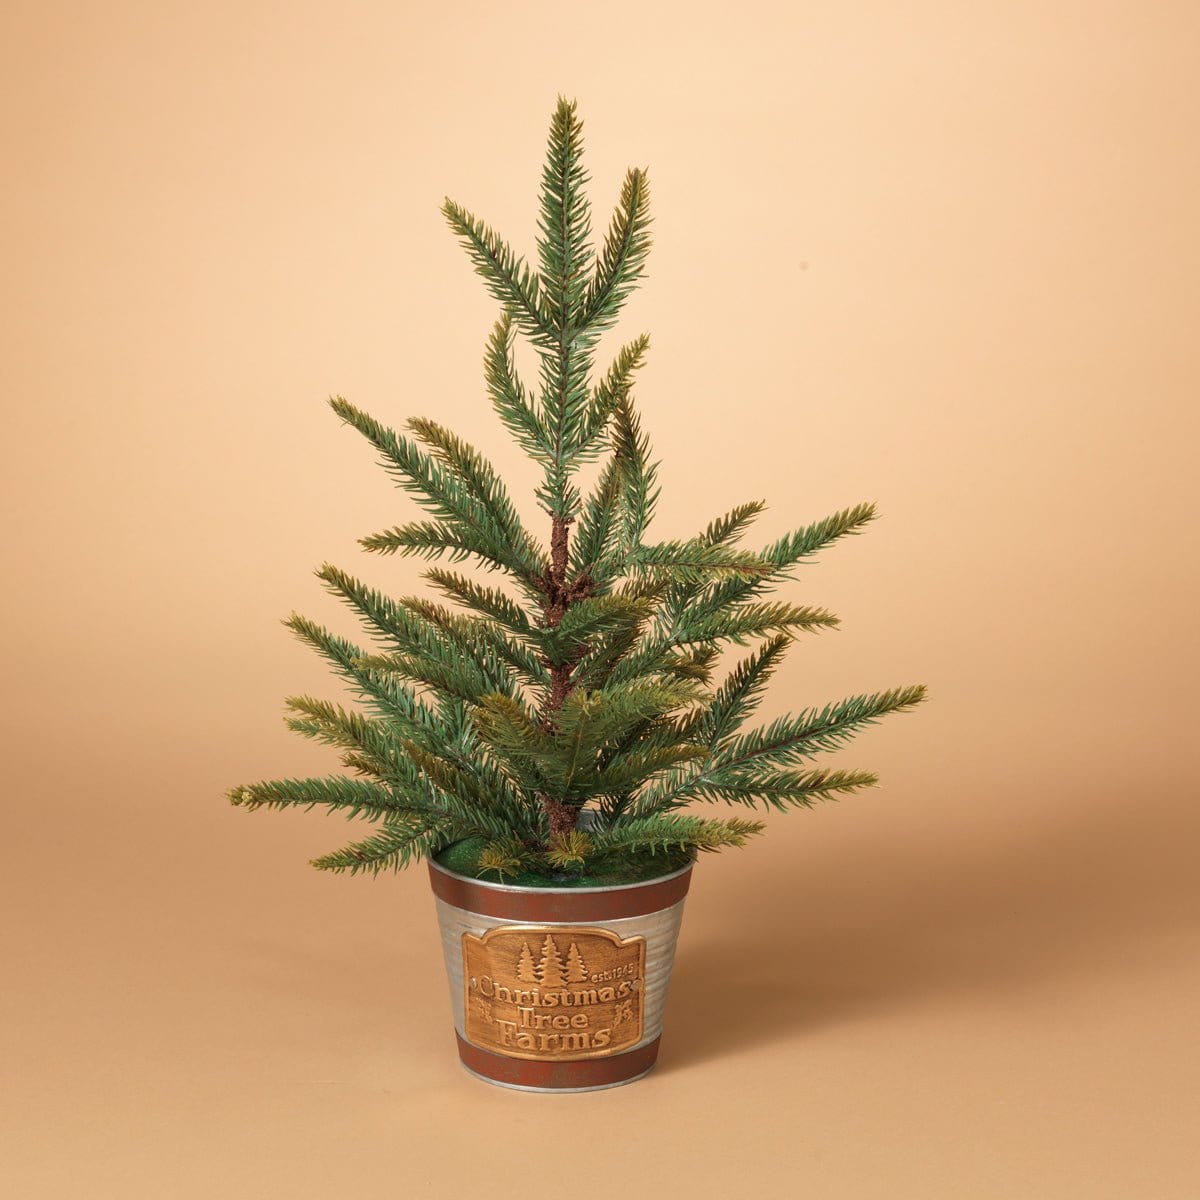 Miniature " Christmas Tree Farms" Pine Tree With Metal Container - 18" h-Gerson-The Village Merchant